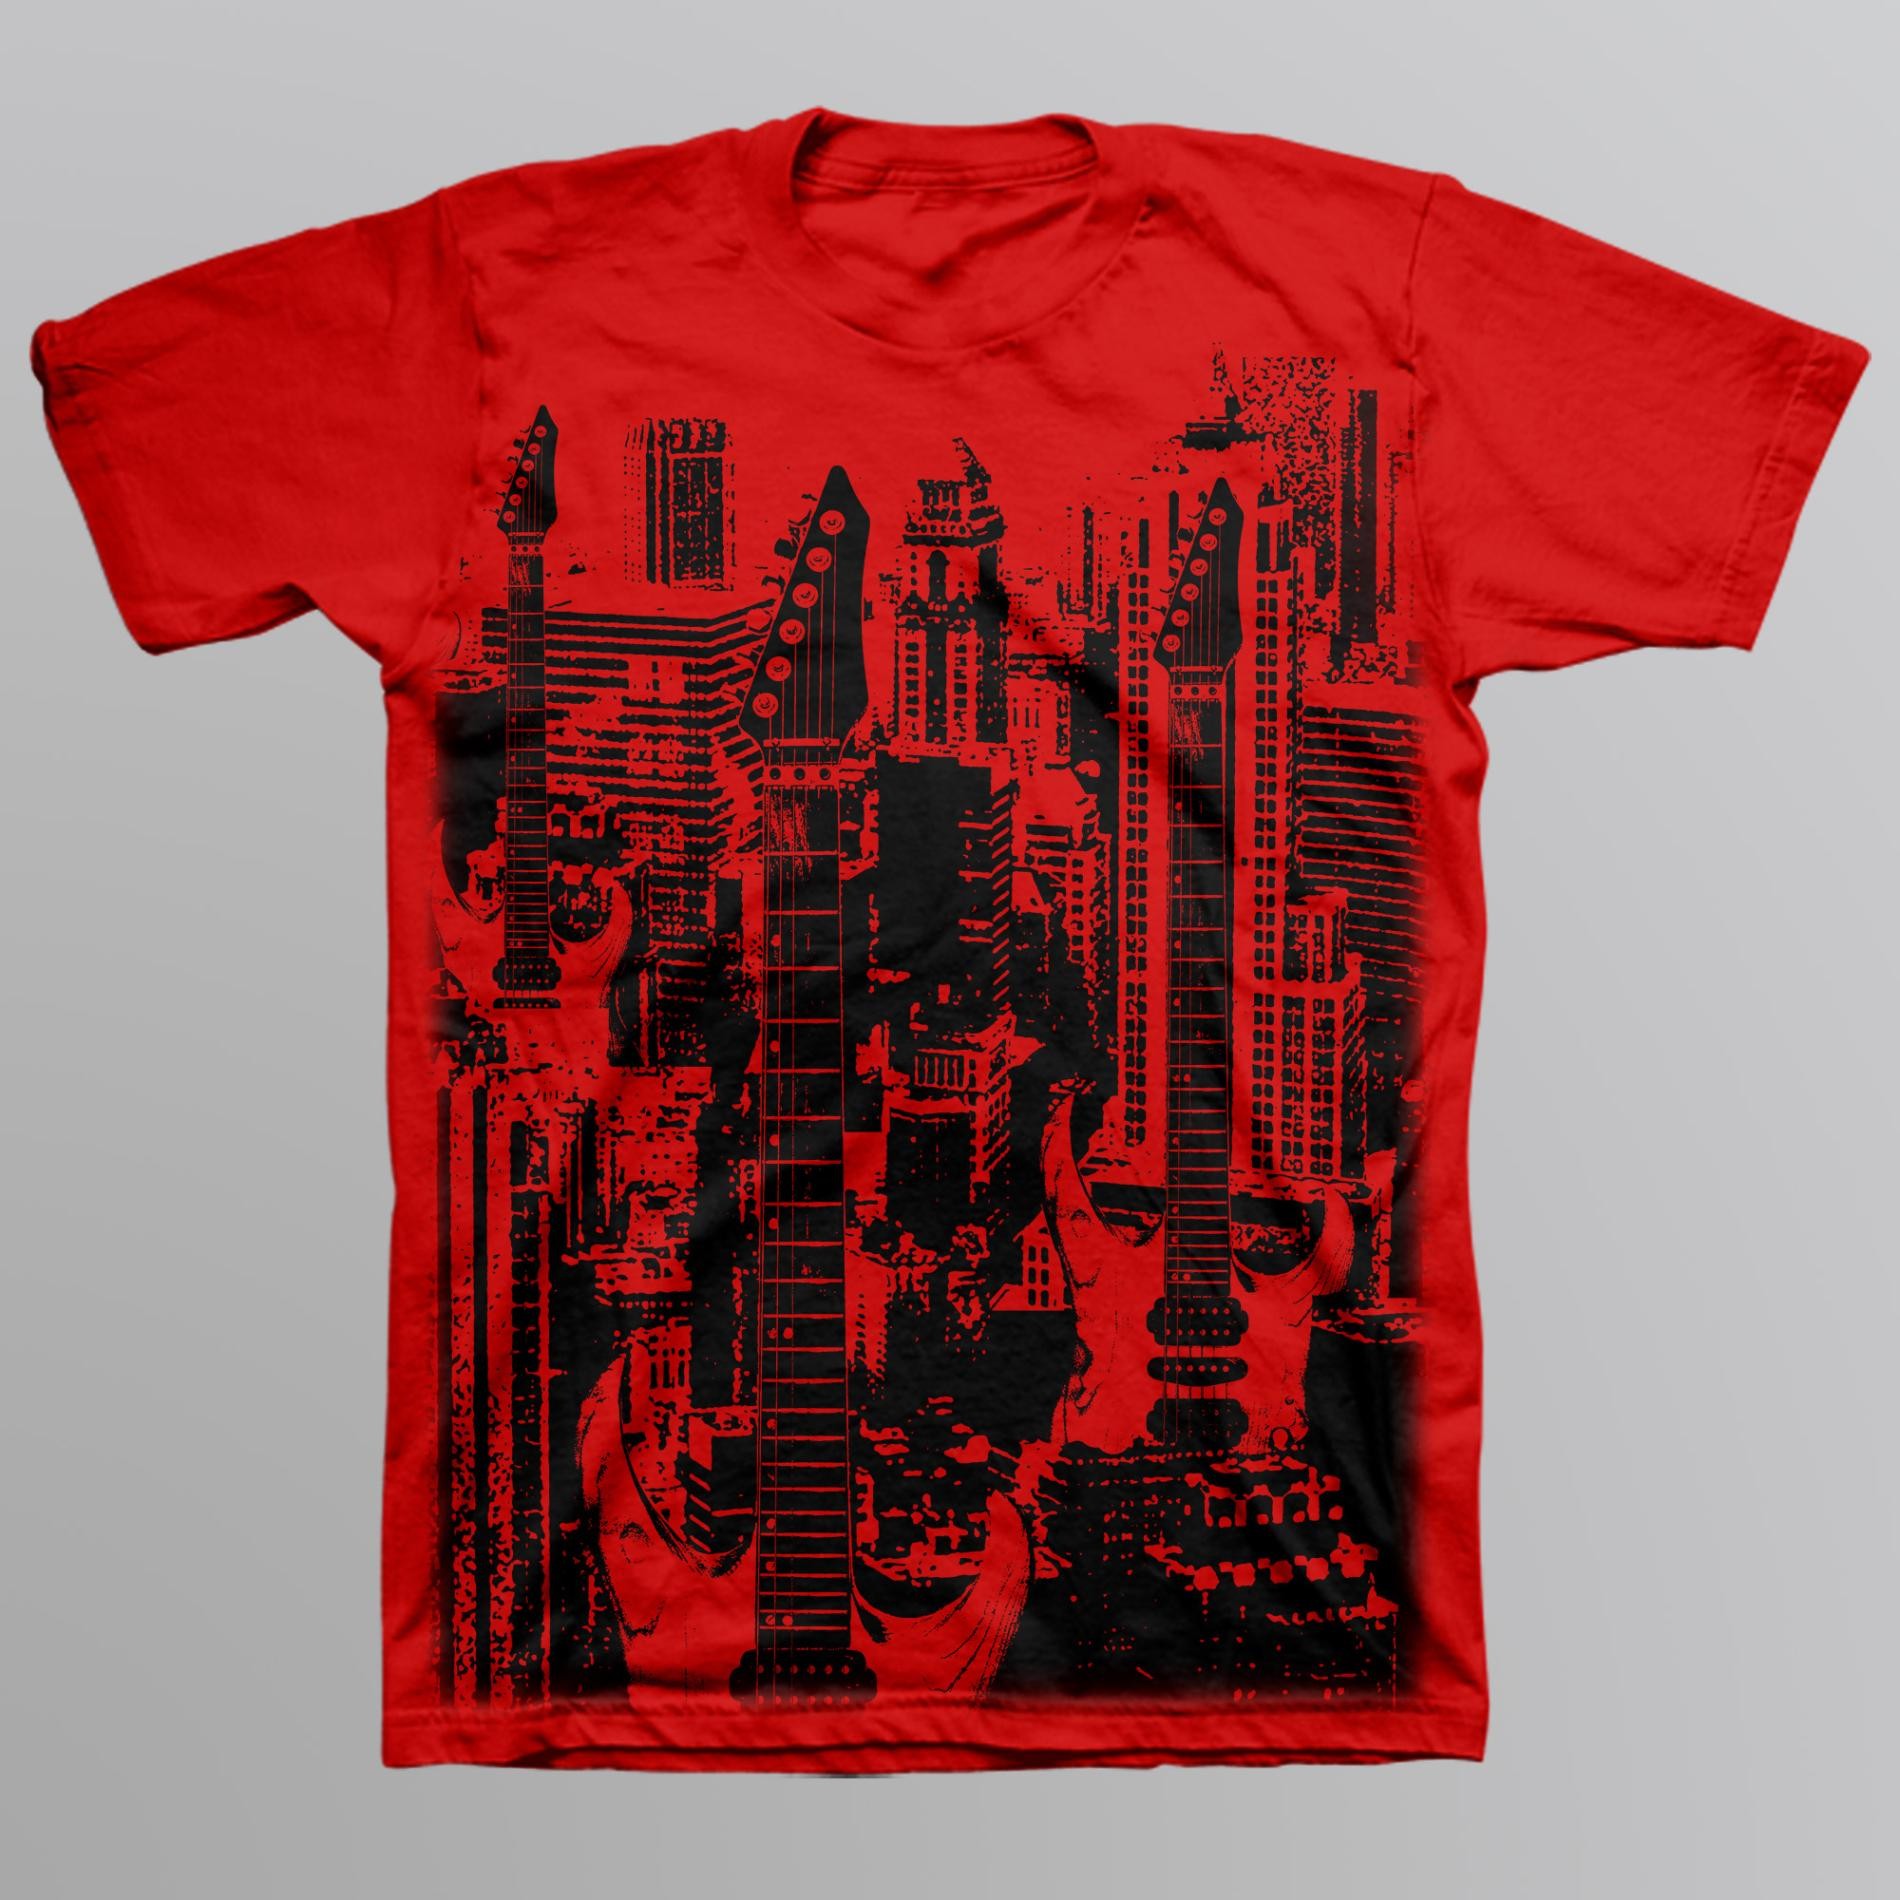 Route 66 Boy's Graphic T-Shirt - Abstract Guitar Skyscraper